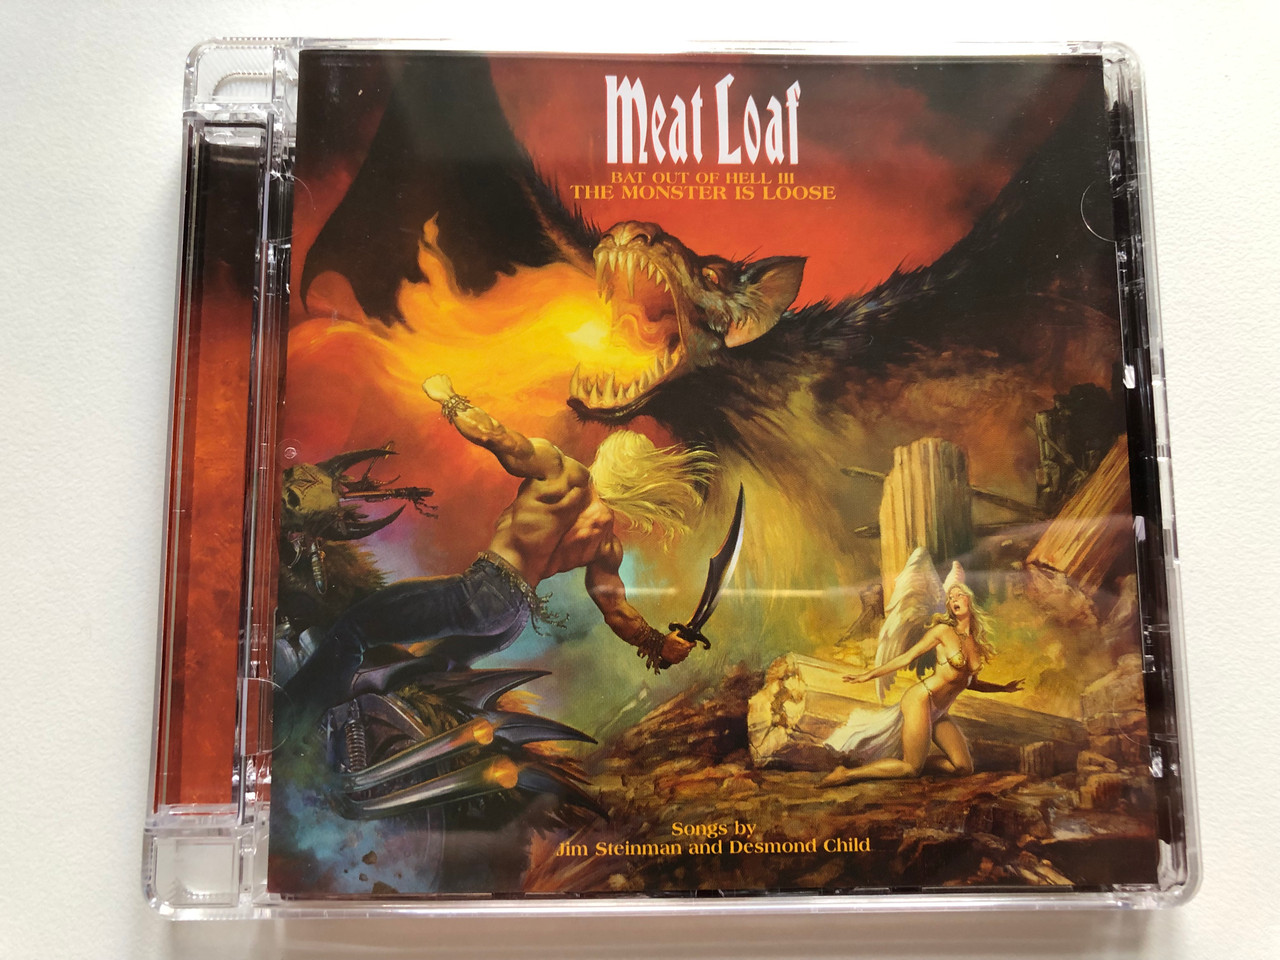 Meat Loaf – Bat Out Of Hell III - The Monster Is Loose / Songs by Jim  Steinman and Desmond Child / Mercury Audio CD 2006 / 171210-0 - Bible in My  Language